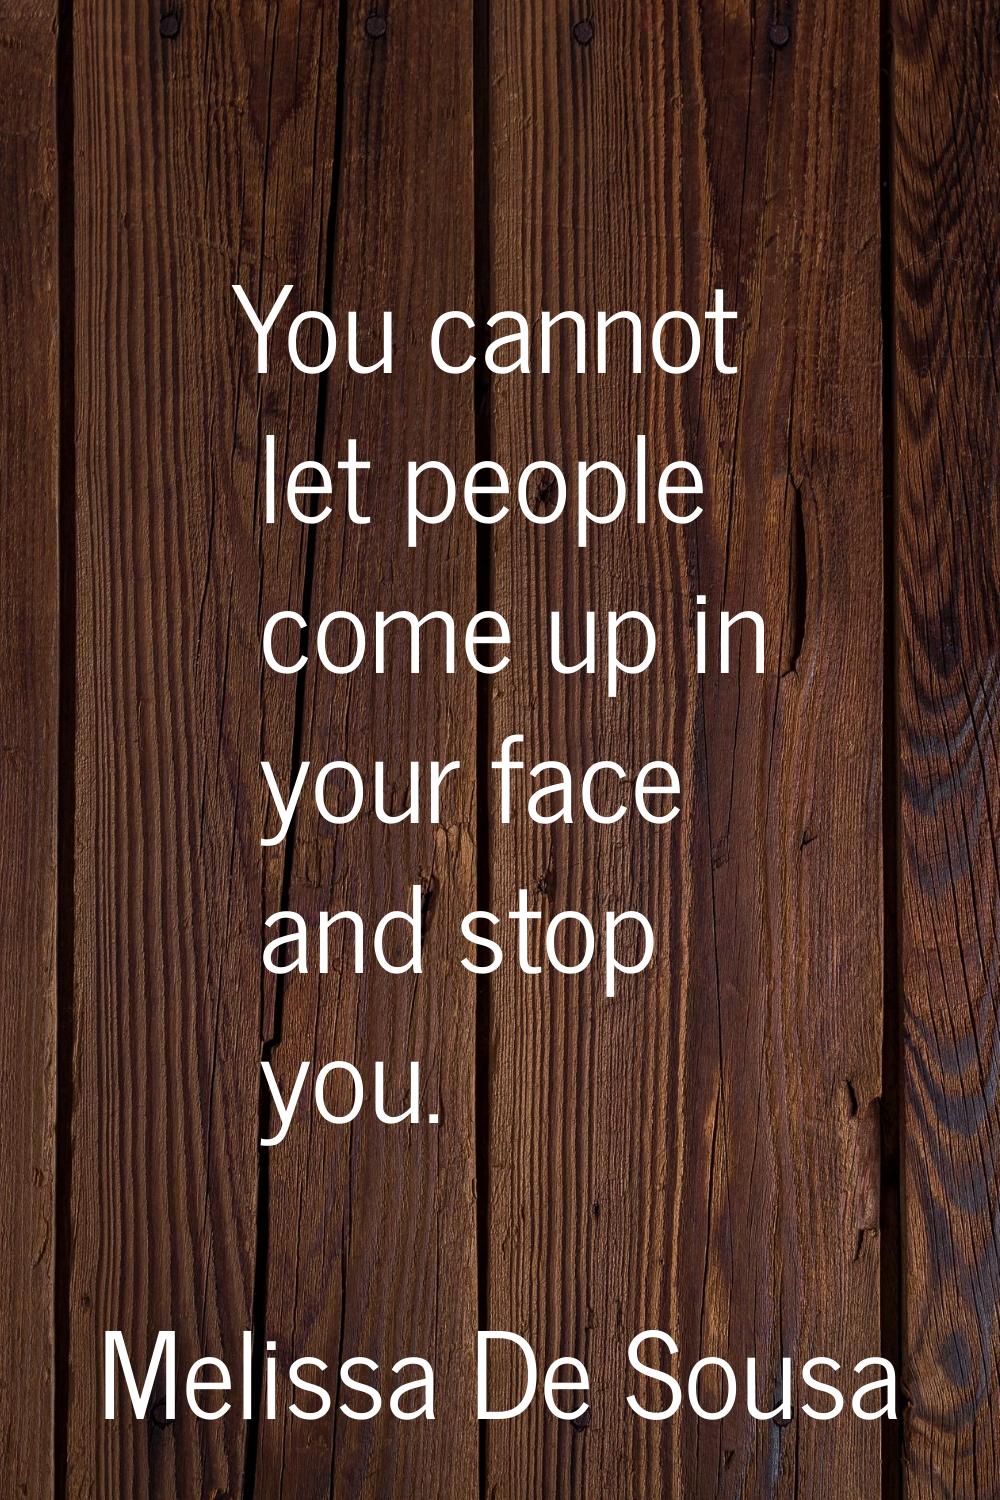 You cannot let people come up in your face and stop you.